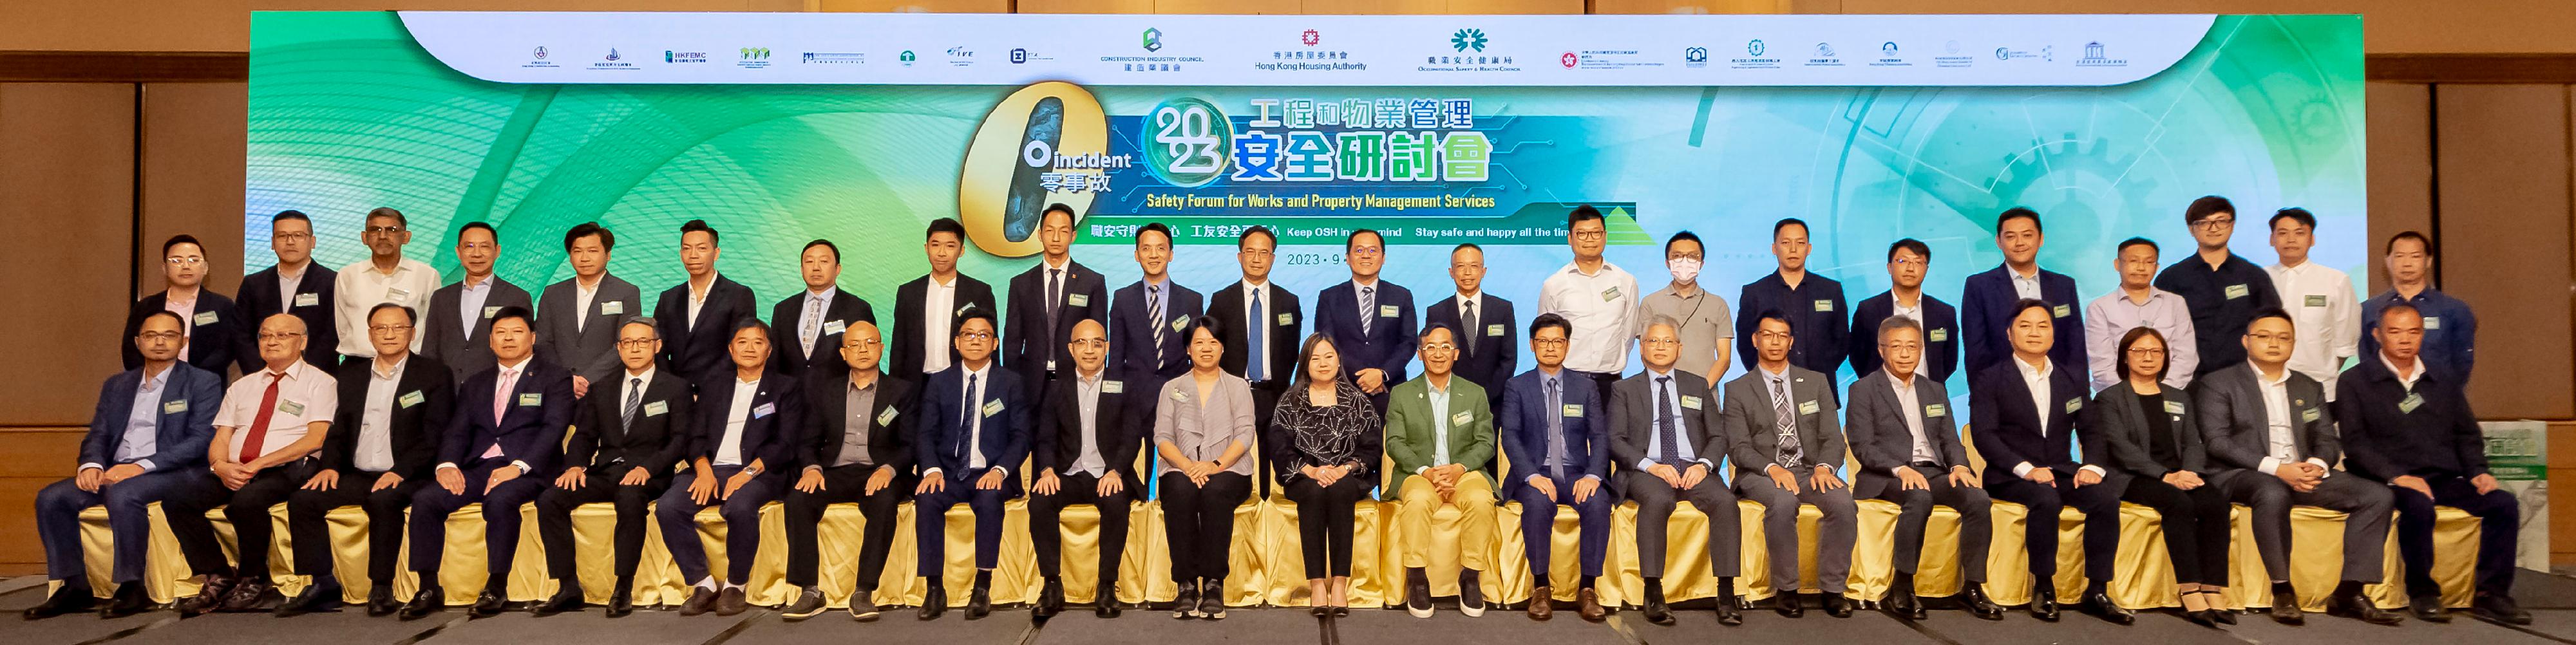 Jointly organised by the Hong Kong Housing Authority, the Occupational Safety and Health Council (OSHC) and the Construction Industry Council (CIC), the annual Safety Forum for Works and Property Management Services was held today (September 28) to disseminate the latest information of site safety to industry practitioners. The Permanent Secretary for Housing, Miss Rosanna Law (front row, 10th right); the Executive Director of the OSHC, Ms Bonnie Yau (front row, 10th left); and the Chairman of the CIC, Mr Thomas Ho (front row, ninth right), are pictured with representatives of supporting organisations and forum speakers.